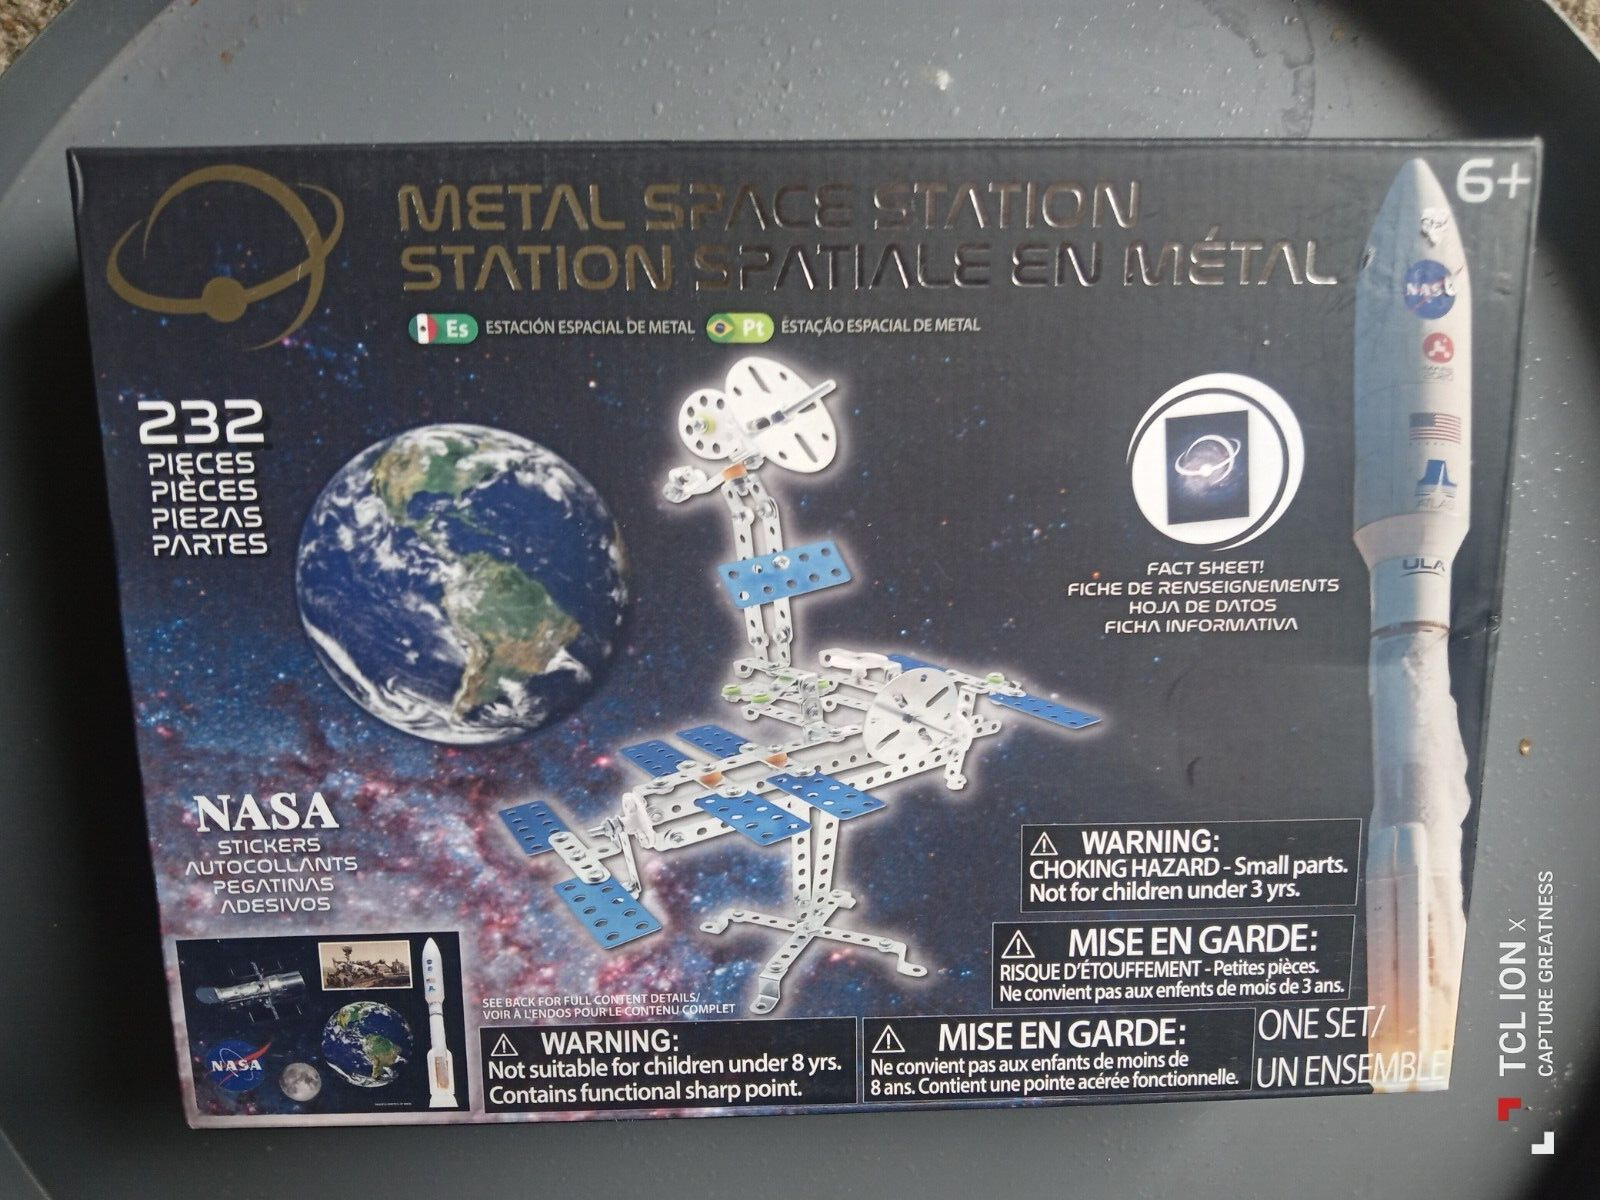 Nasa Metal Space Station 232 pieces including Nasa Stickers